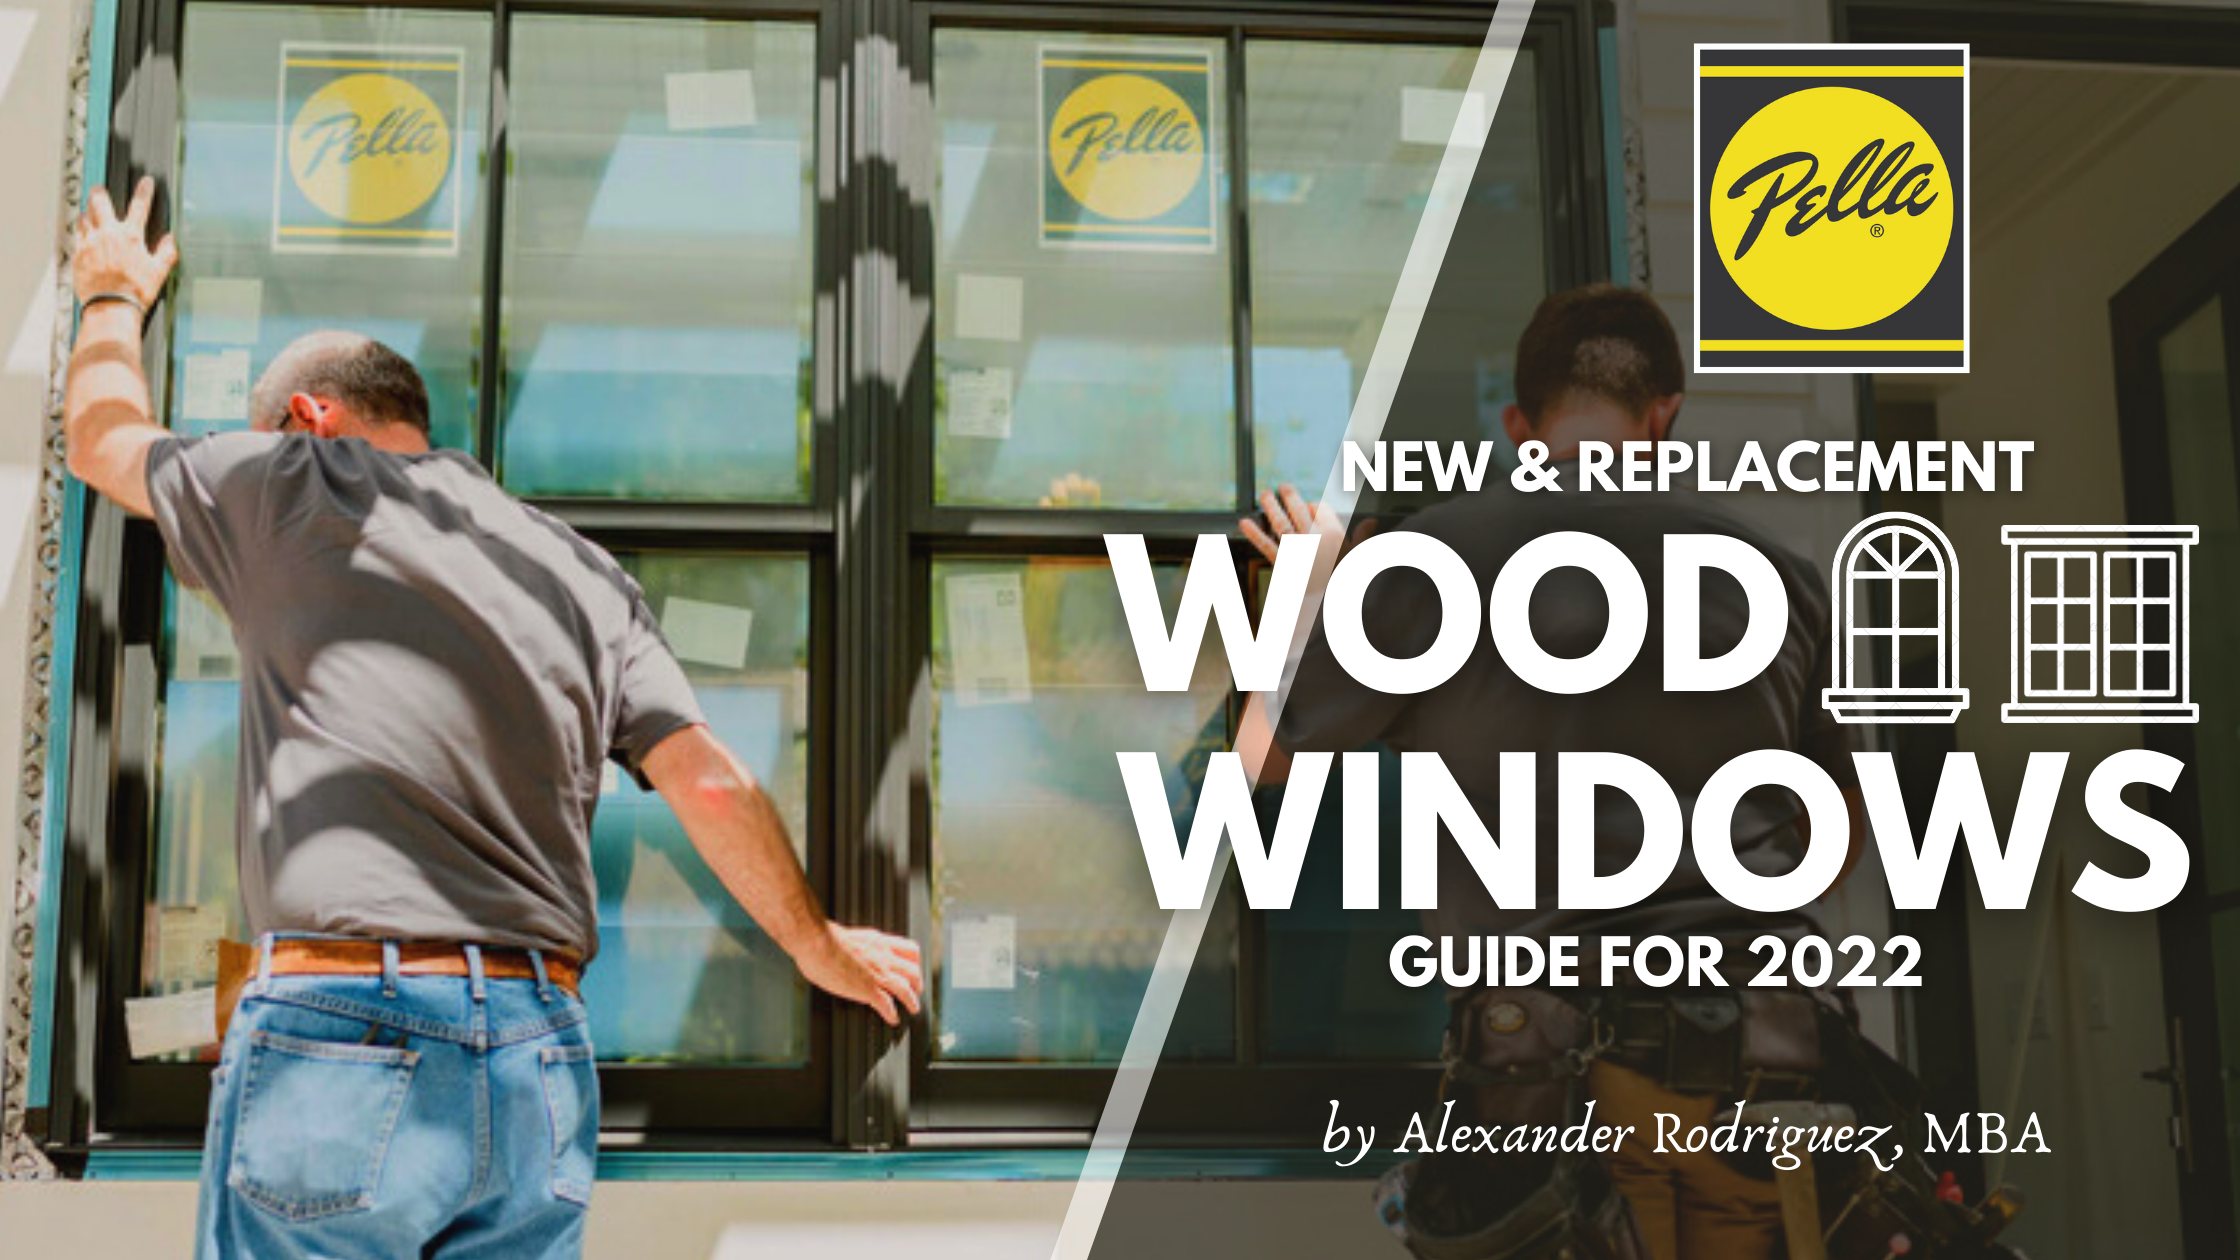 The Complete 2022 Guide to Replacing Custom Wood Windows In Palos Verdes Estates, CA